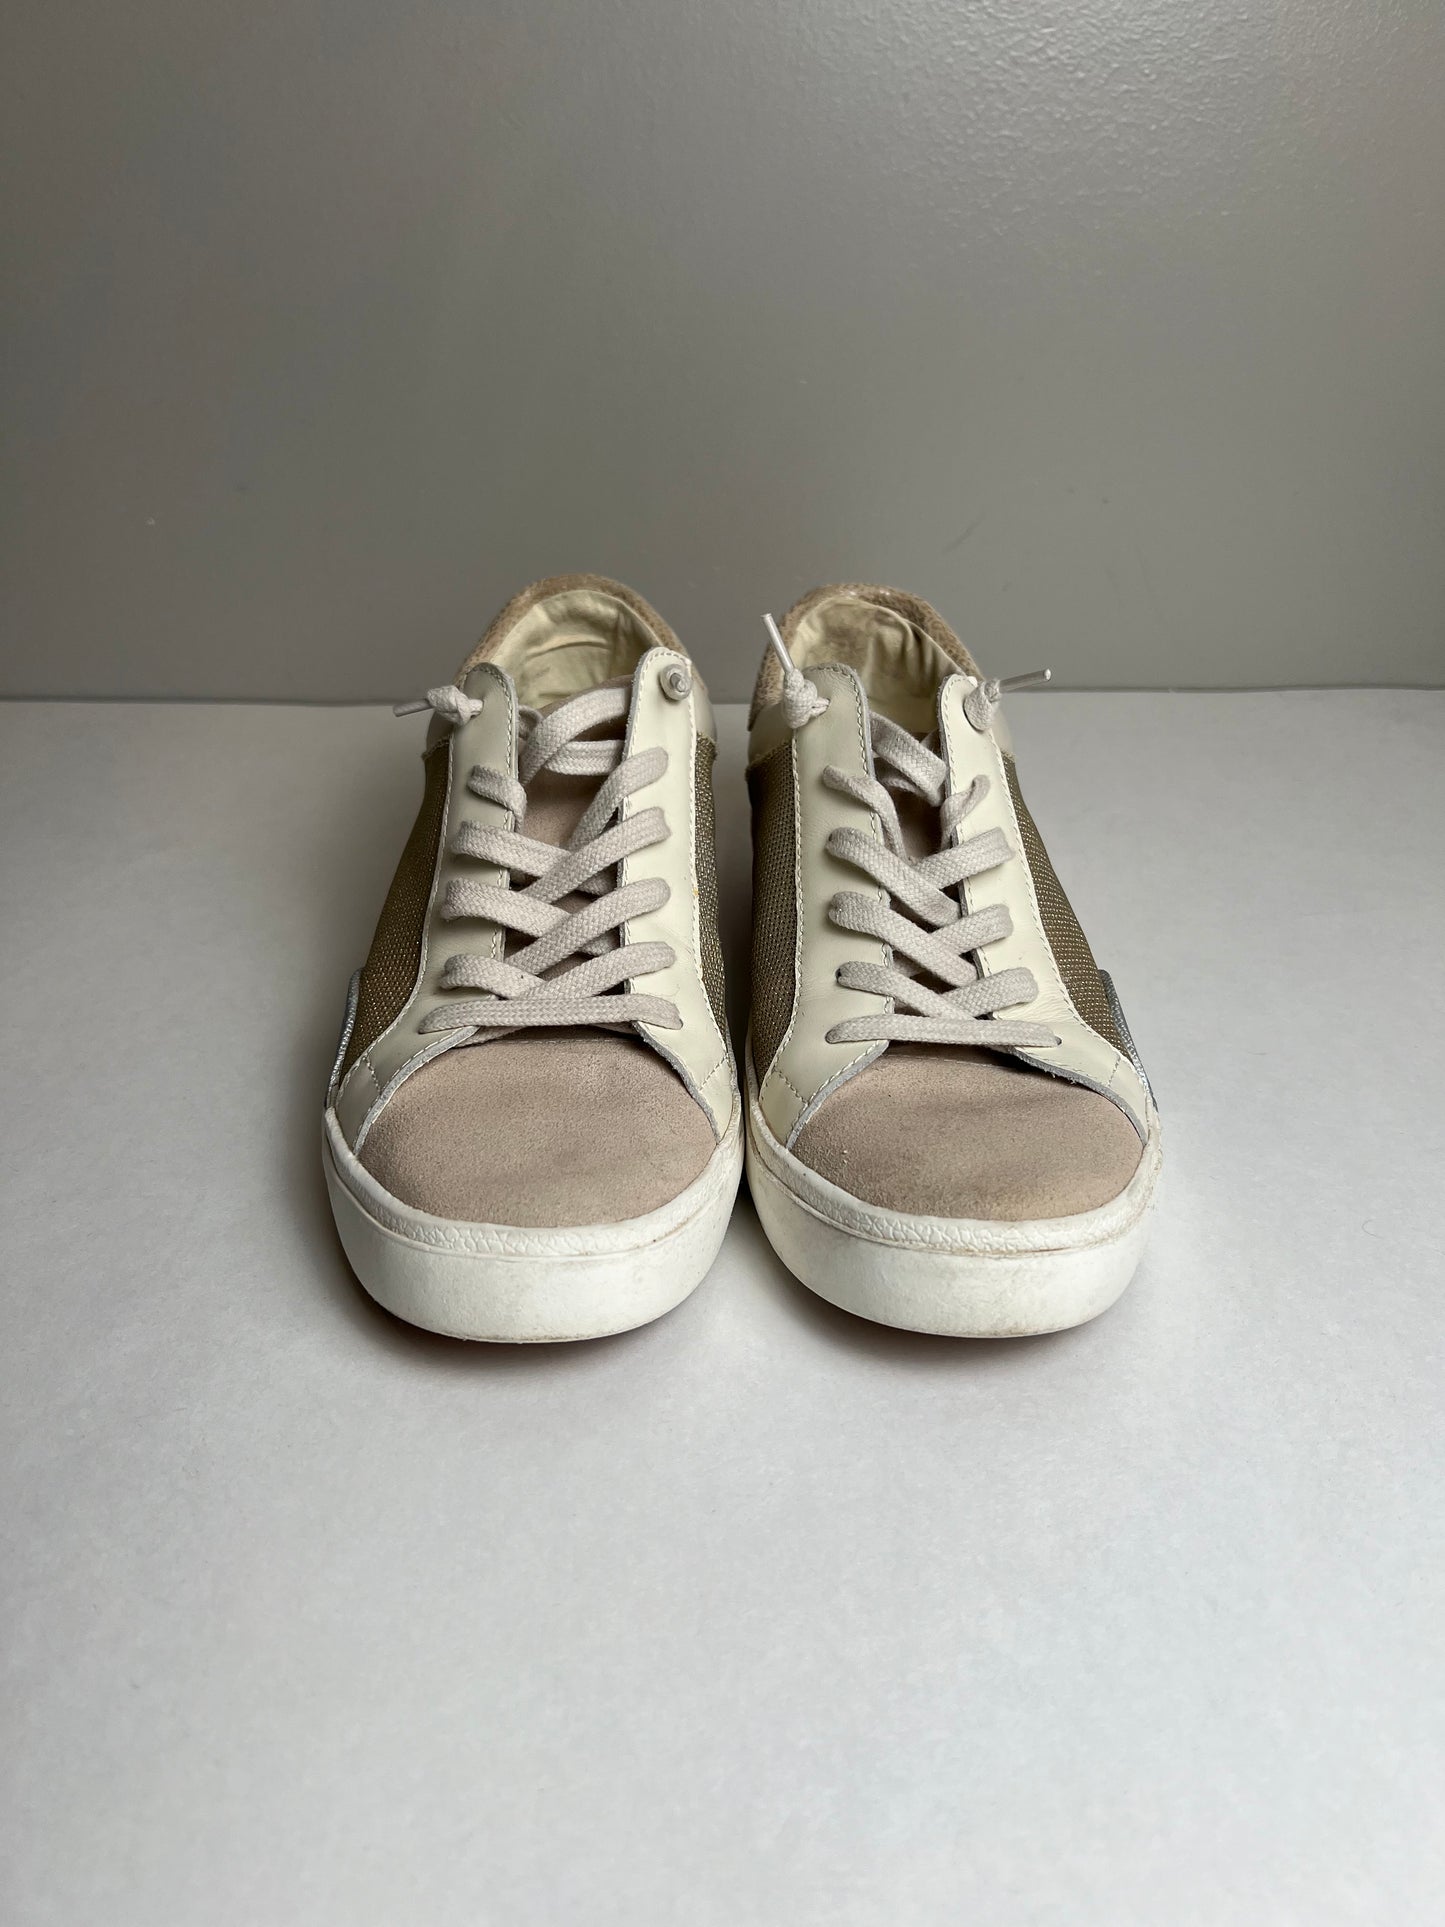 Shoes Sneakers By Dolce Vita  Size: 8.5